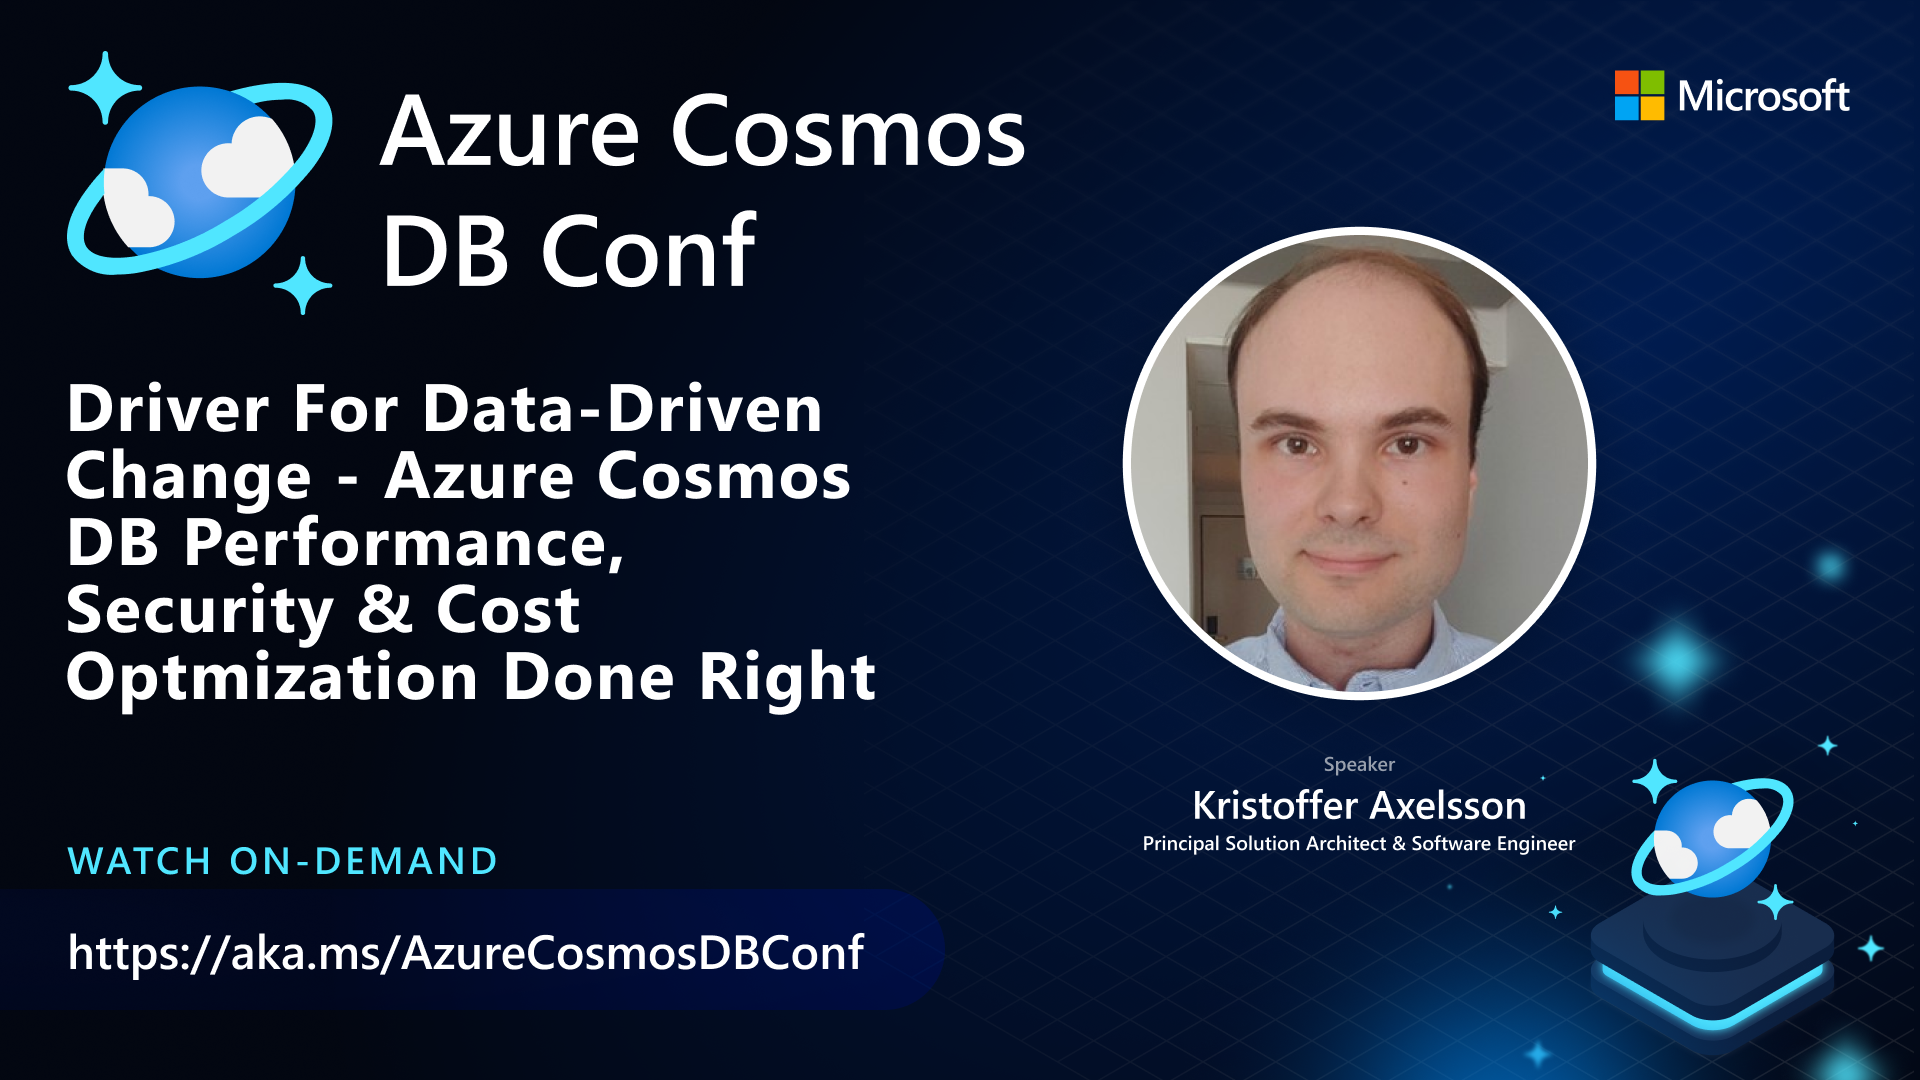 Driver For Data-Driven Change - Azure Cosmos DB Performance, Security & Cost Optmization Done Right, Kristoffer's session at Azure Cosmos DB conf 2022